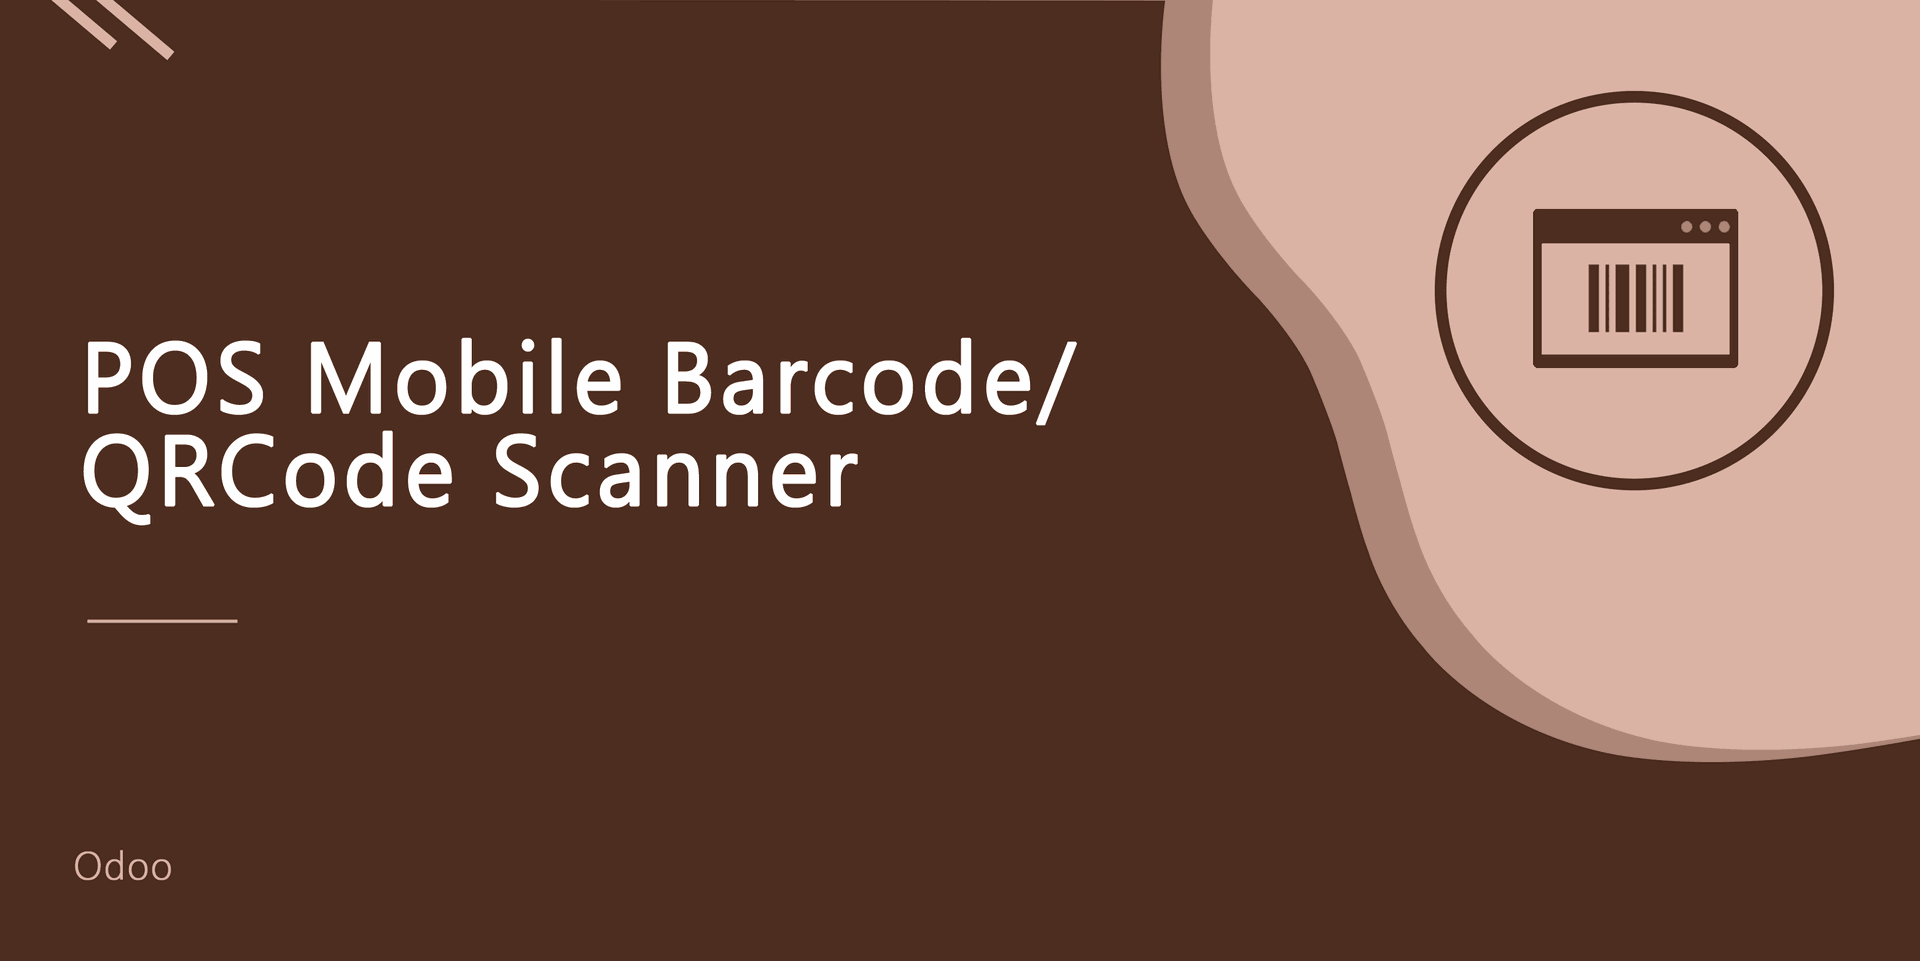 POS Mobile Barcode/QRCode Scanner